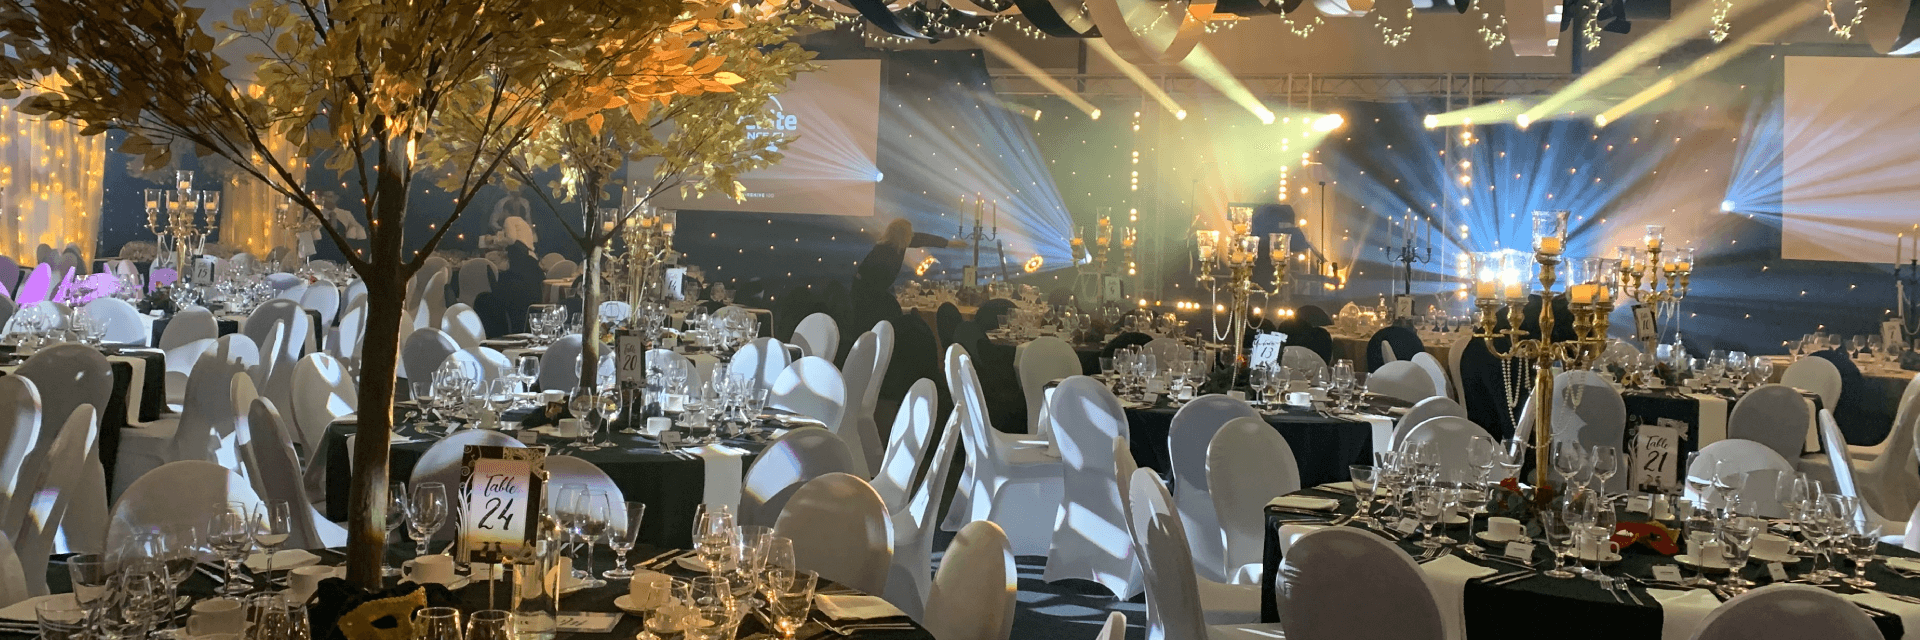 Unique Event Location, Set Up With An Autumn Style Theme